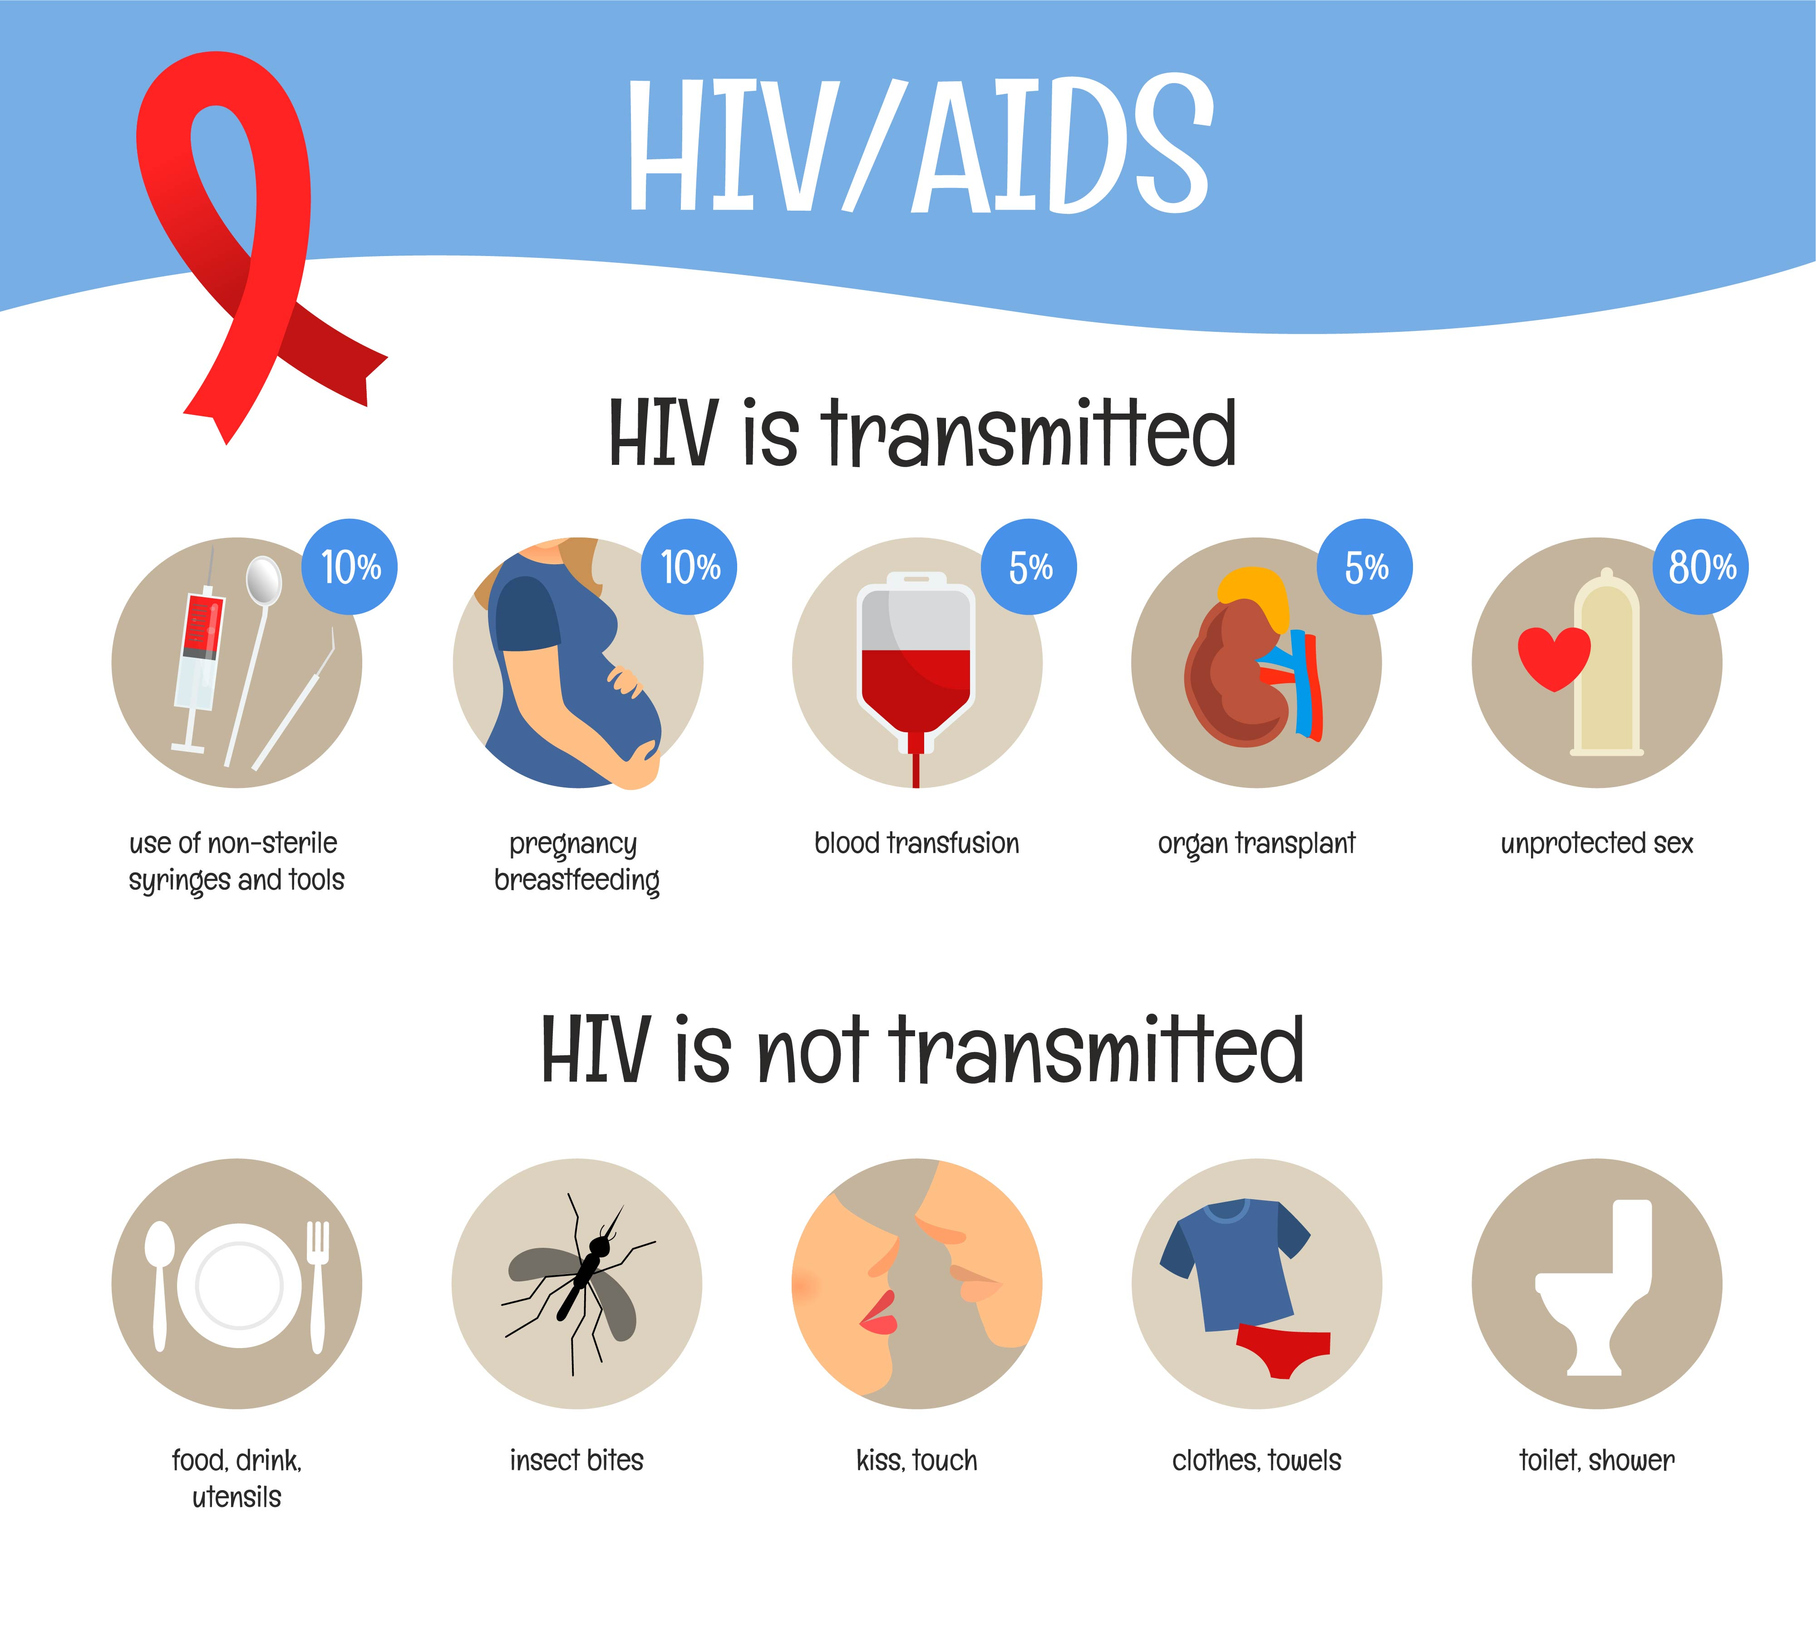 How HIV/AIDS is Transmitted